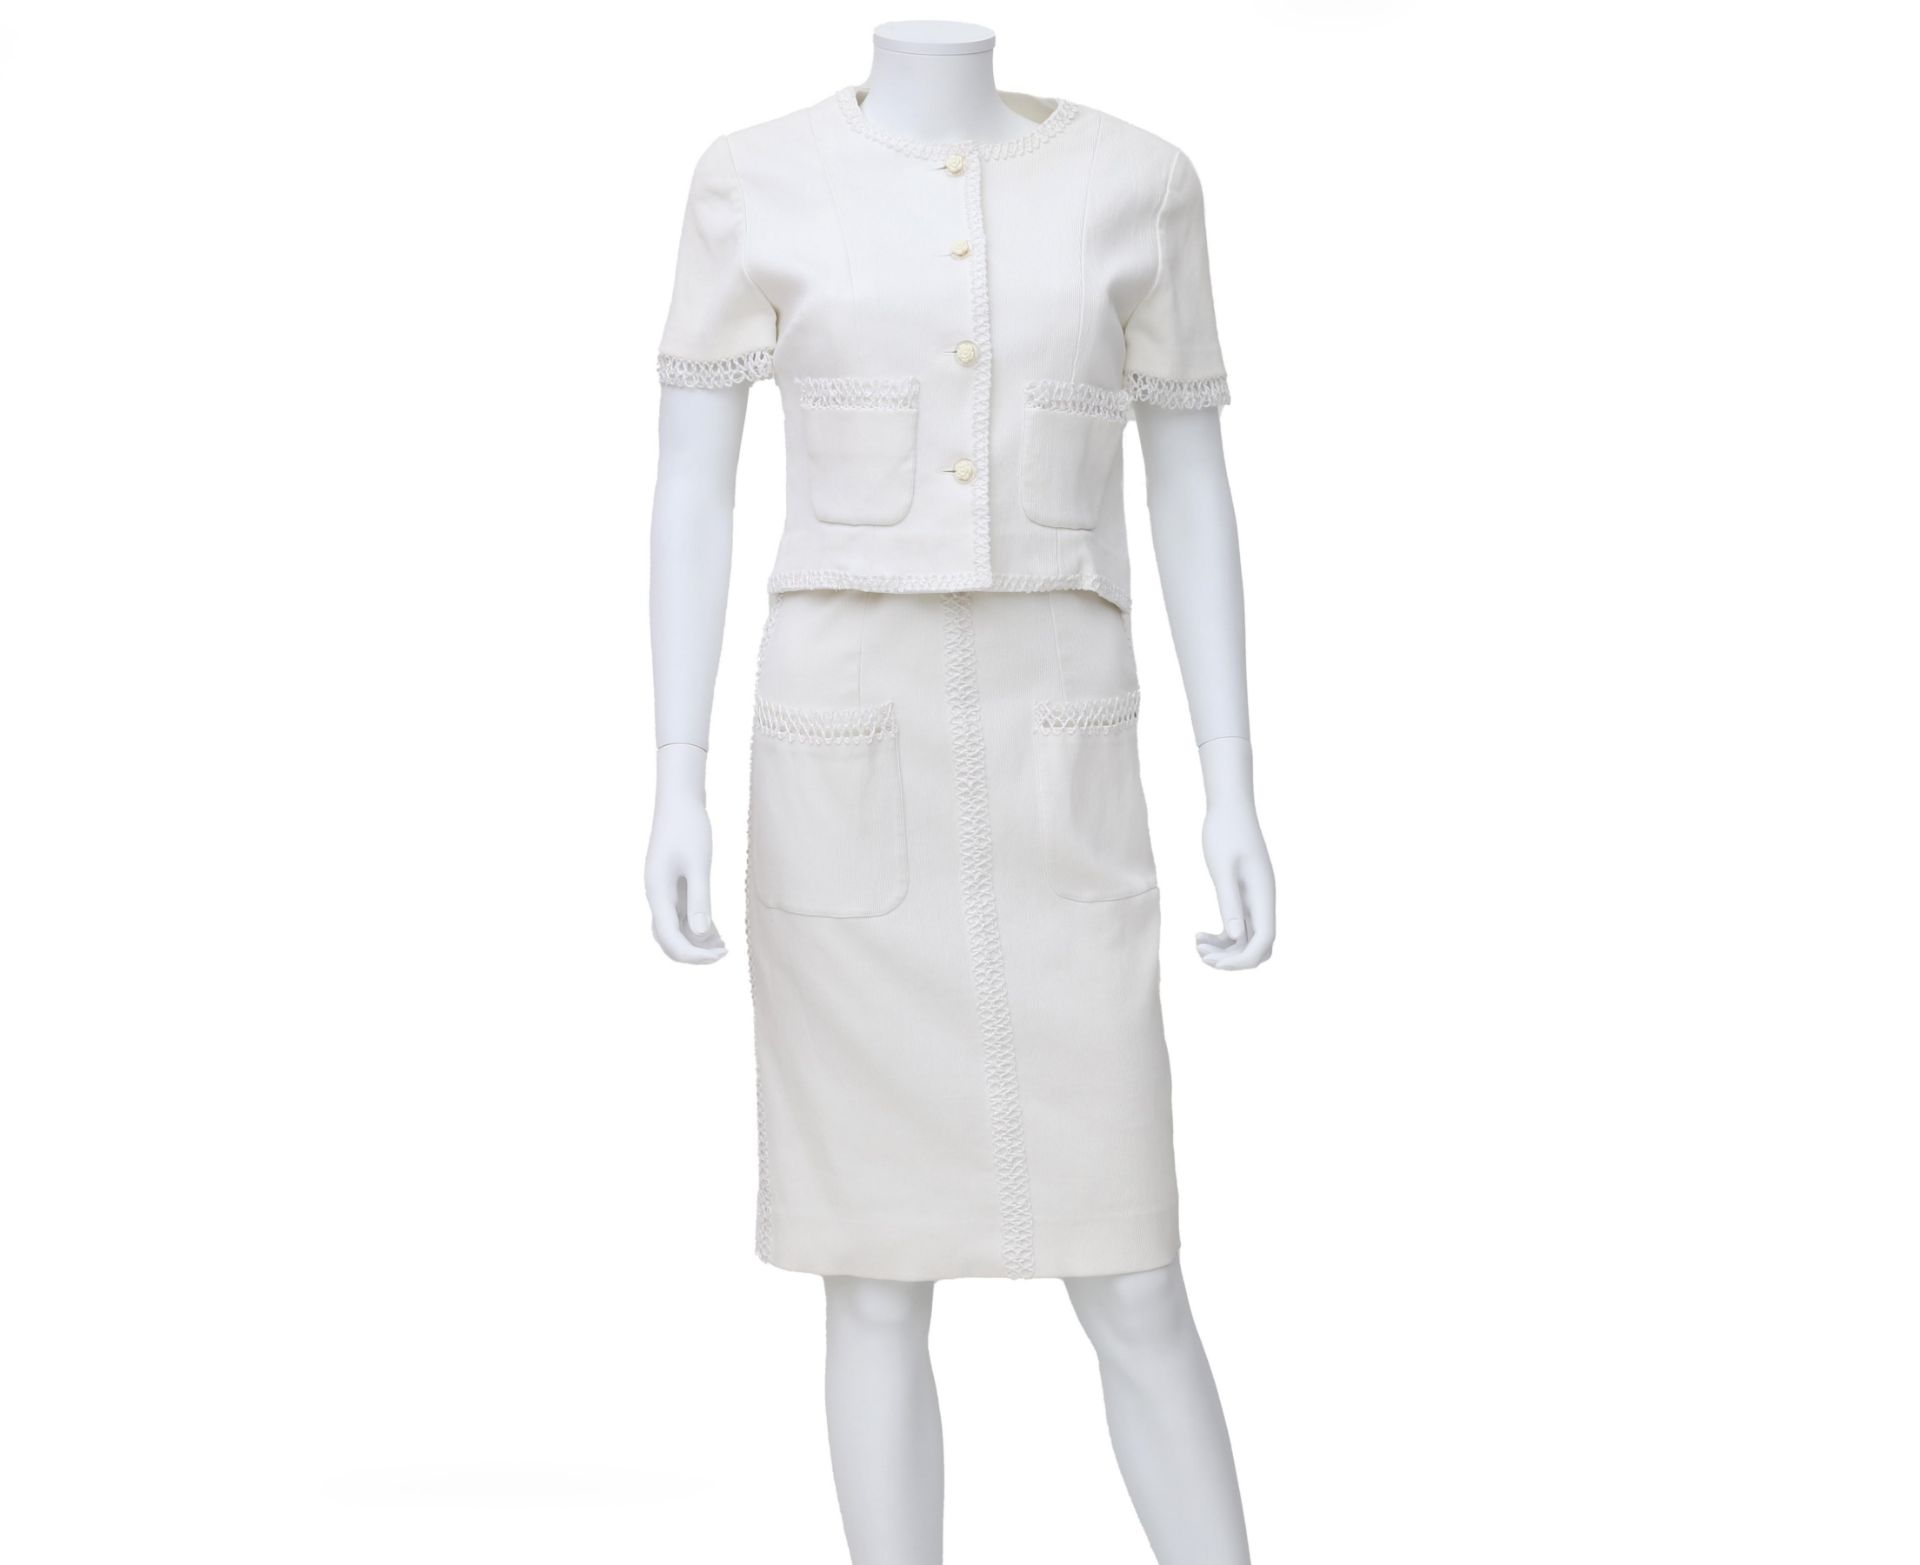 A white Chanel Boutique ensemble of a dress and jacket. The edges of the dress and jacket are made